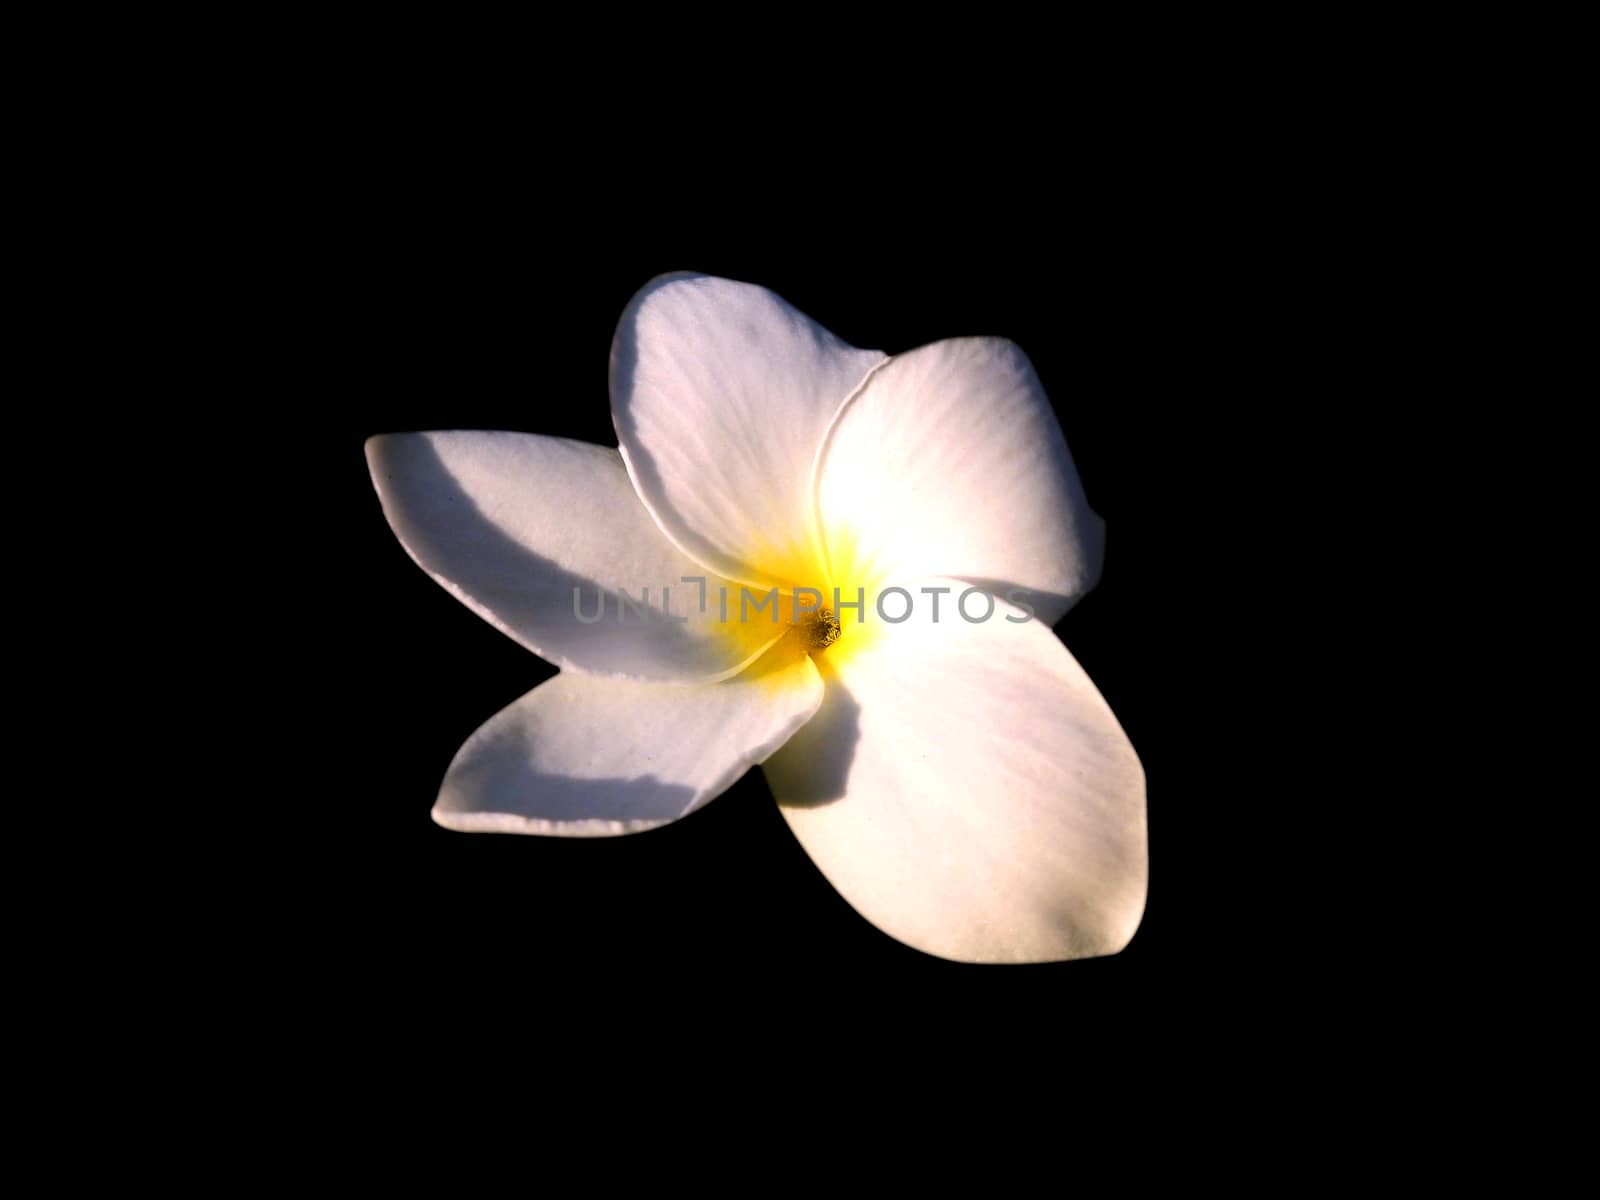 White flowers on a black background represents peace.